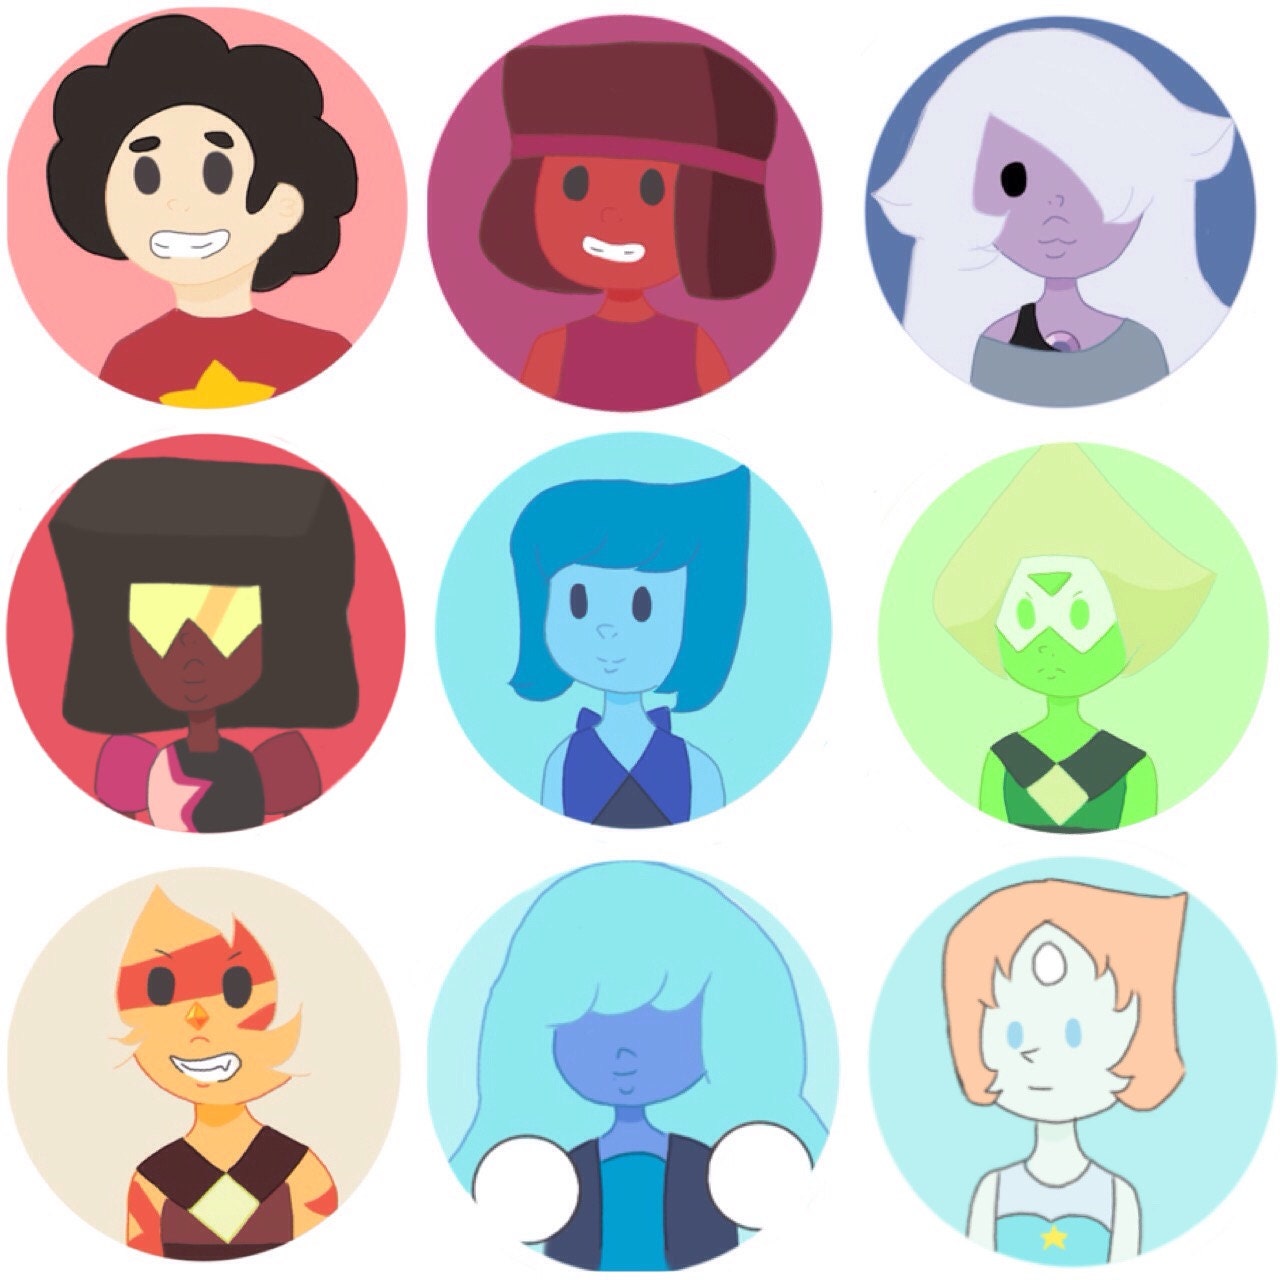 steven universe sticker pack all 12 stickers by